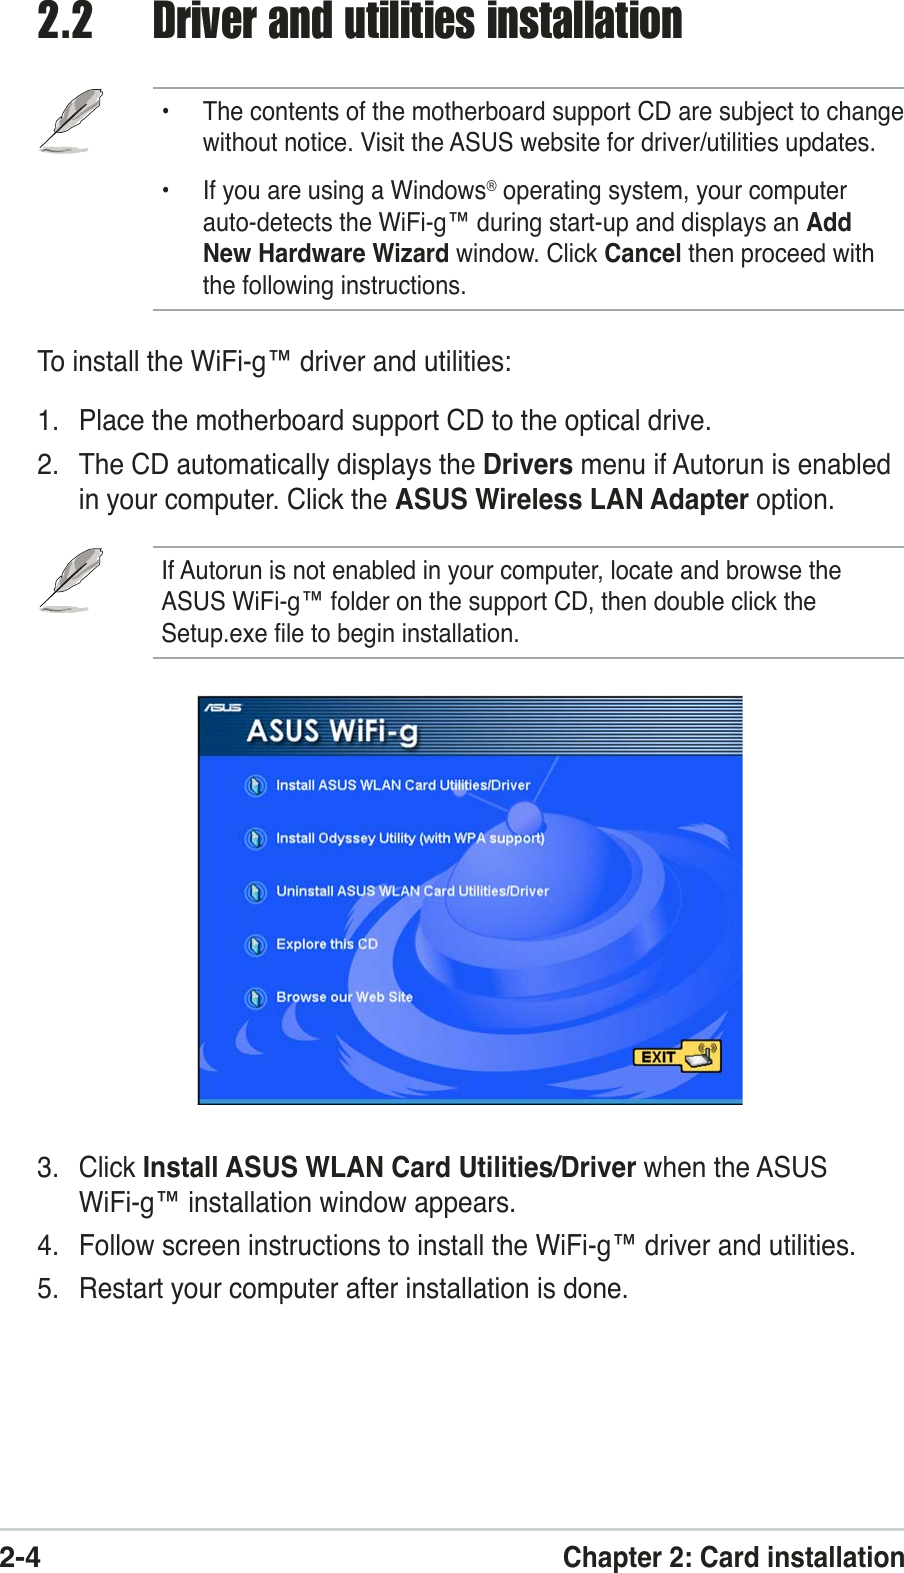 2-4Chapter 2: Card installation2.2 Driver and utilities installation• The contents of the motherboard support CD are subject to changewithout notice. Visit the ASUS website for driver/utilities updates.• If you are using a Windows® operating system, your computerauto-detects the WiFi-g™ during start-up and displays an AddNew Hardware Wizard window. Click Cancel then proceed withthe following instructions.To install the WiFi-g™ driver and utilities:1. Place the motherboard support CD to the optical drive.2. The CD automatically displays the Drivers menu if Autorun is enabledin your computer. Click the ASUS Wireless LAN Adapter option.If Autorun is not enabled in your computer, locate and browse theASUS WiFi-g™ folder on the support CD, then double click theSetup.exe file to begin installation.3. Click Install ASUS WLAN Card Utilities/Driver when the ASUSWiFi-g™ installation window appears.4. Follow screen instructions to install the WiFi-g™ driver and utilities.5. Restart your computer after installation is done.